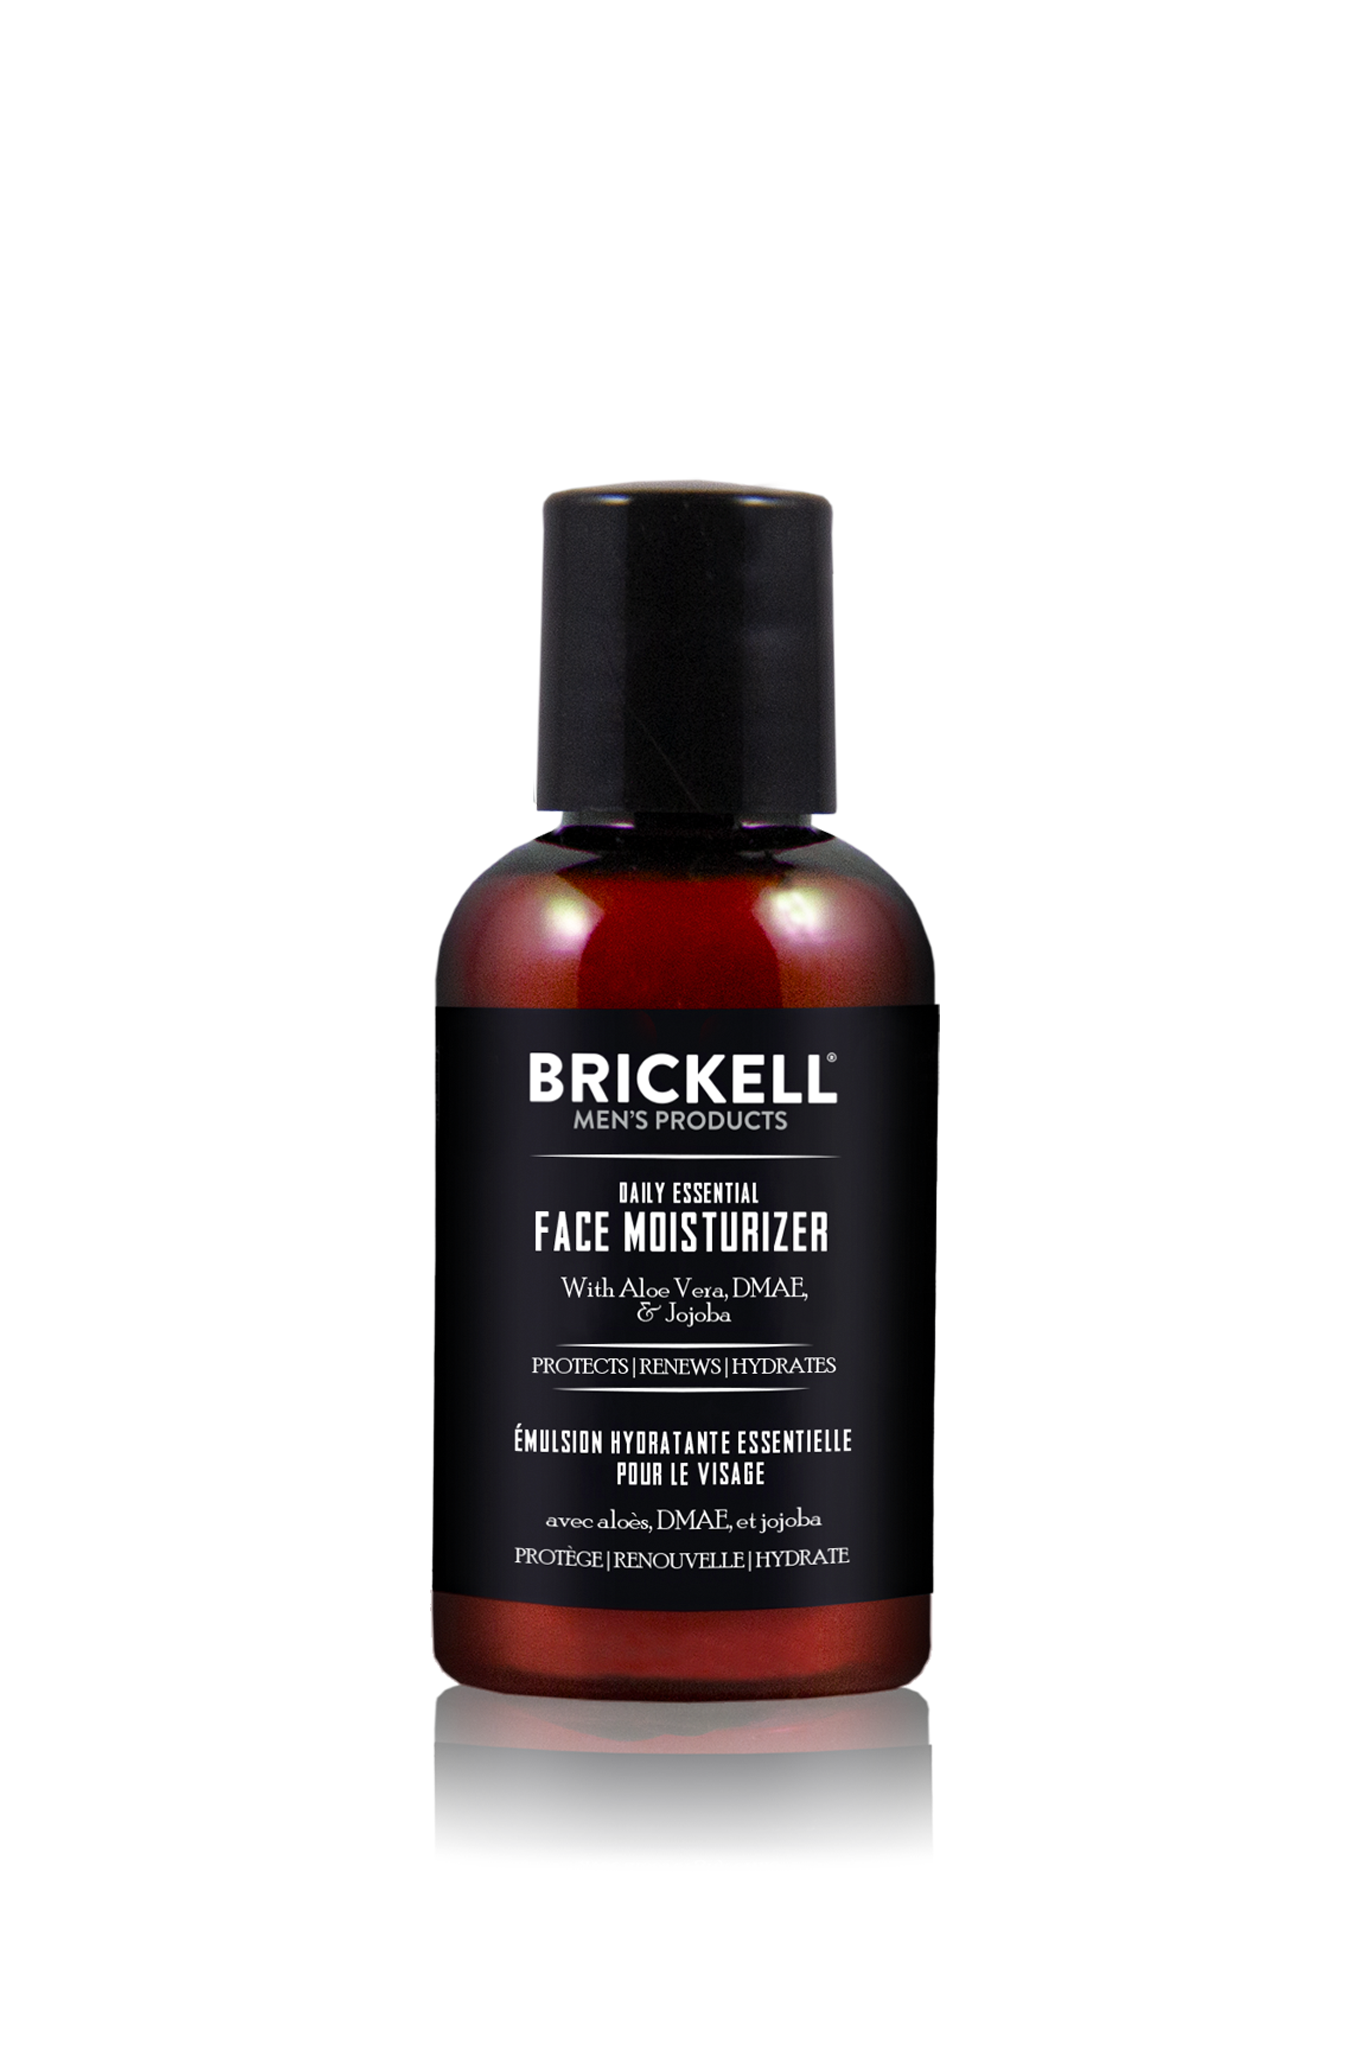 https://cdn.shopify.com/s/files/1/0513/2409/t/30/assets/TS_DAILY-ESSENTIAL-FACE-MOISTURIZER16843334523168.png?v=1684333455